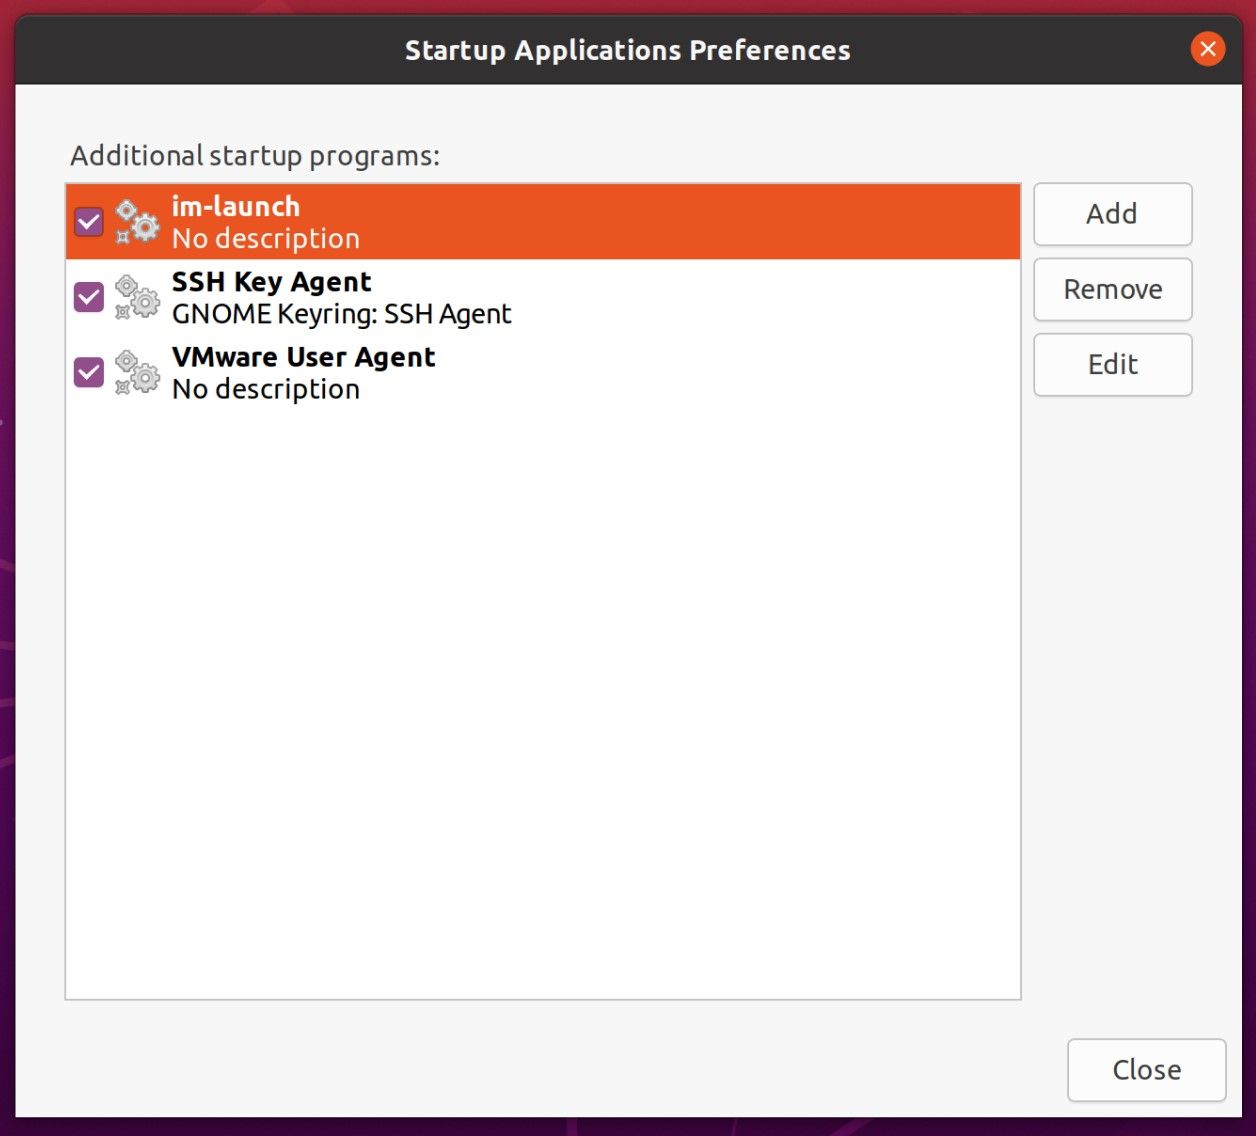 Startup Applications Preferences interface